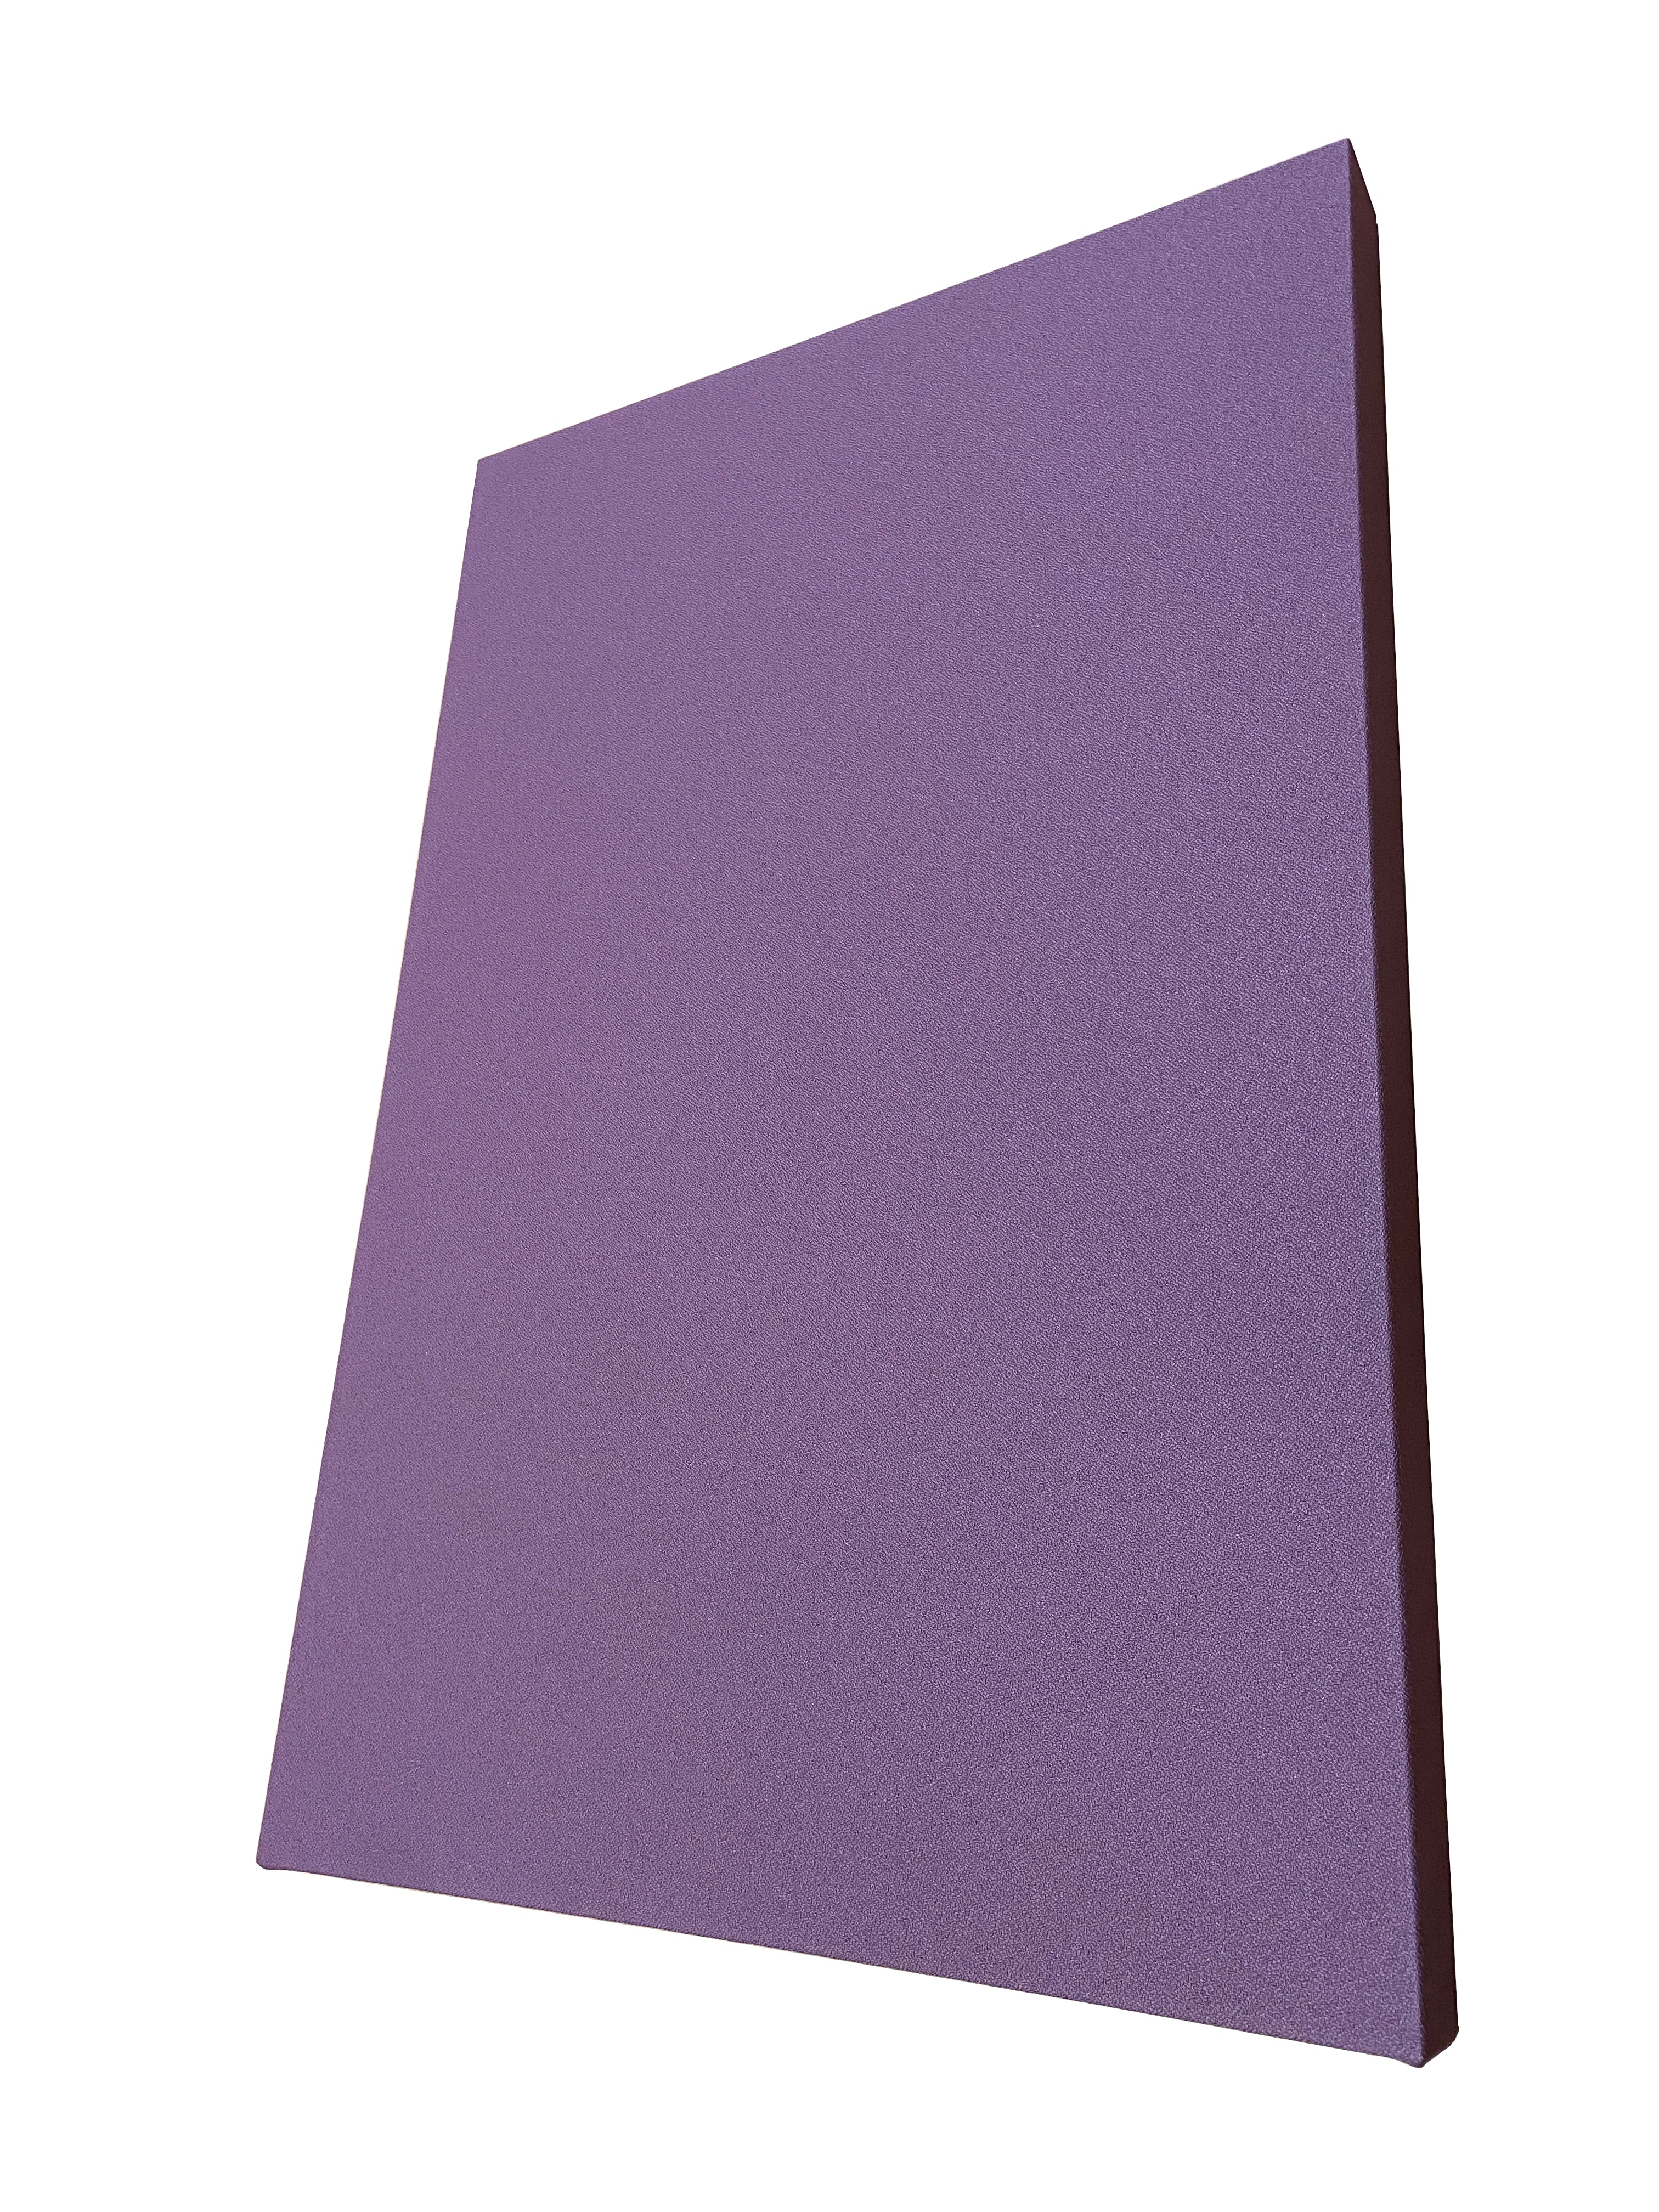 2" SoundControl Ceiling Mounted Acoustic Panel 2ft by 3ft - 0